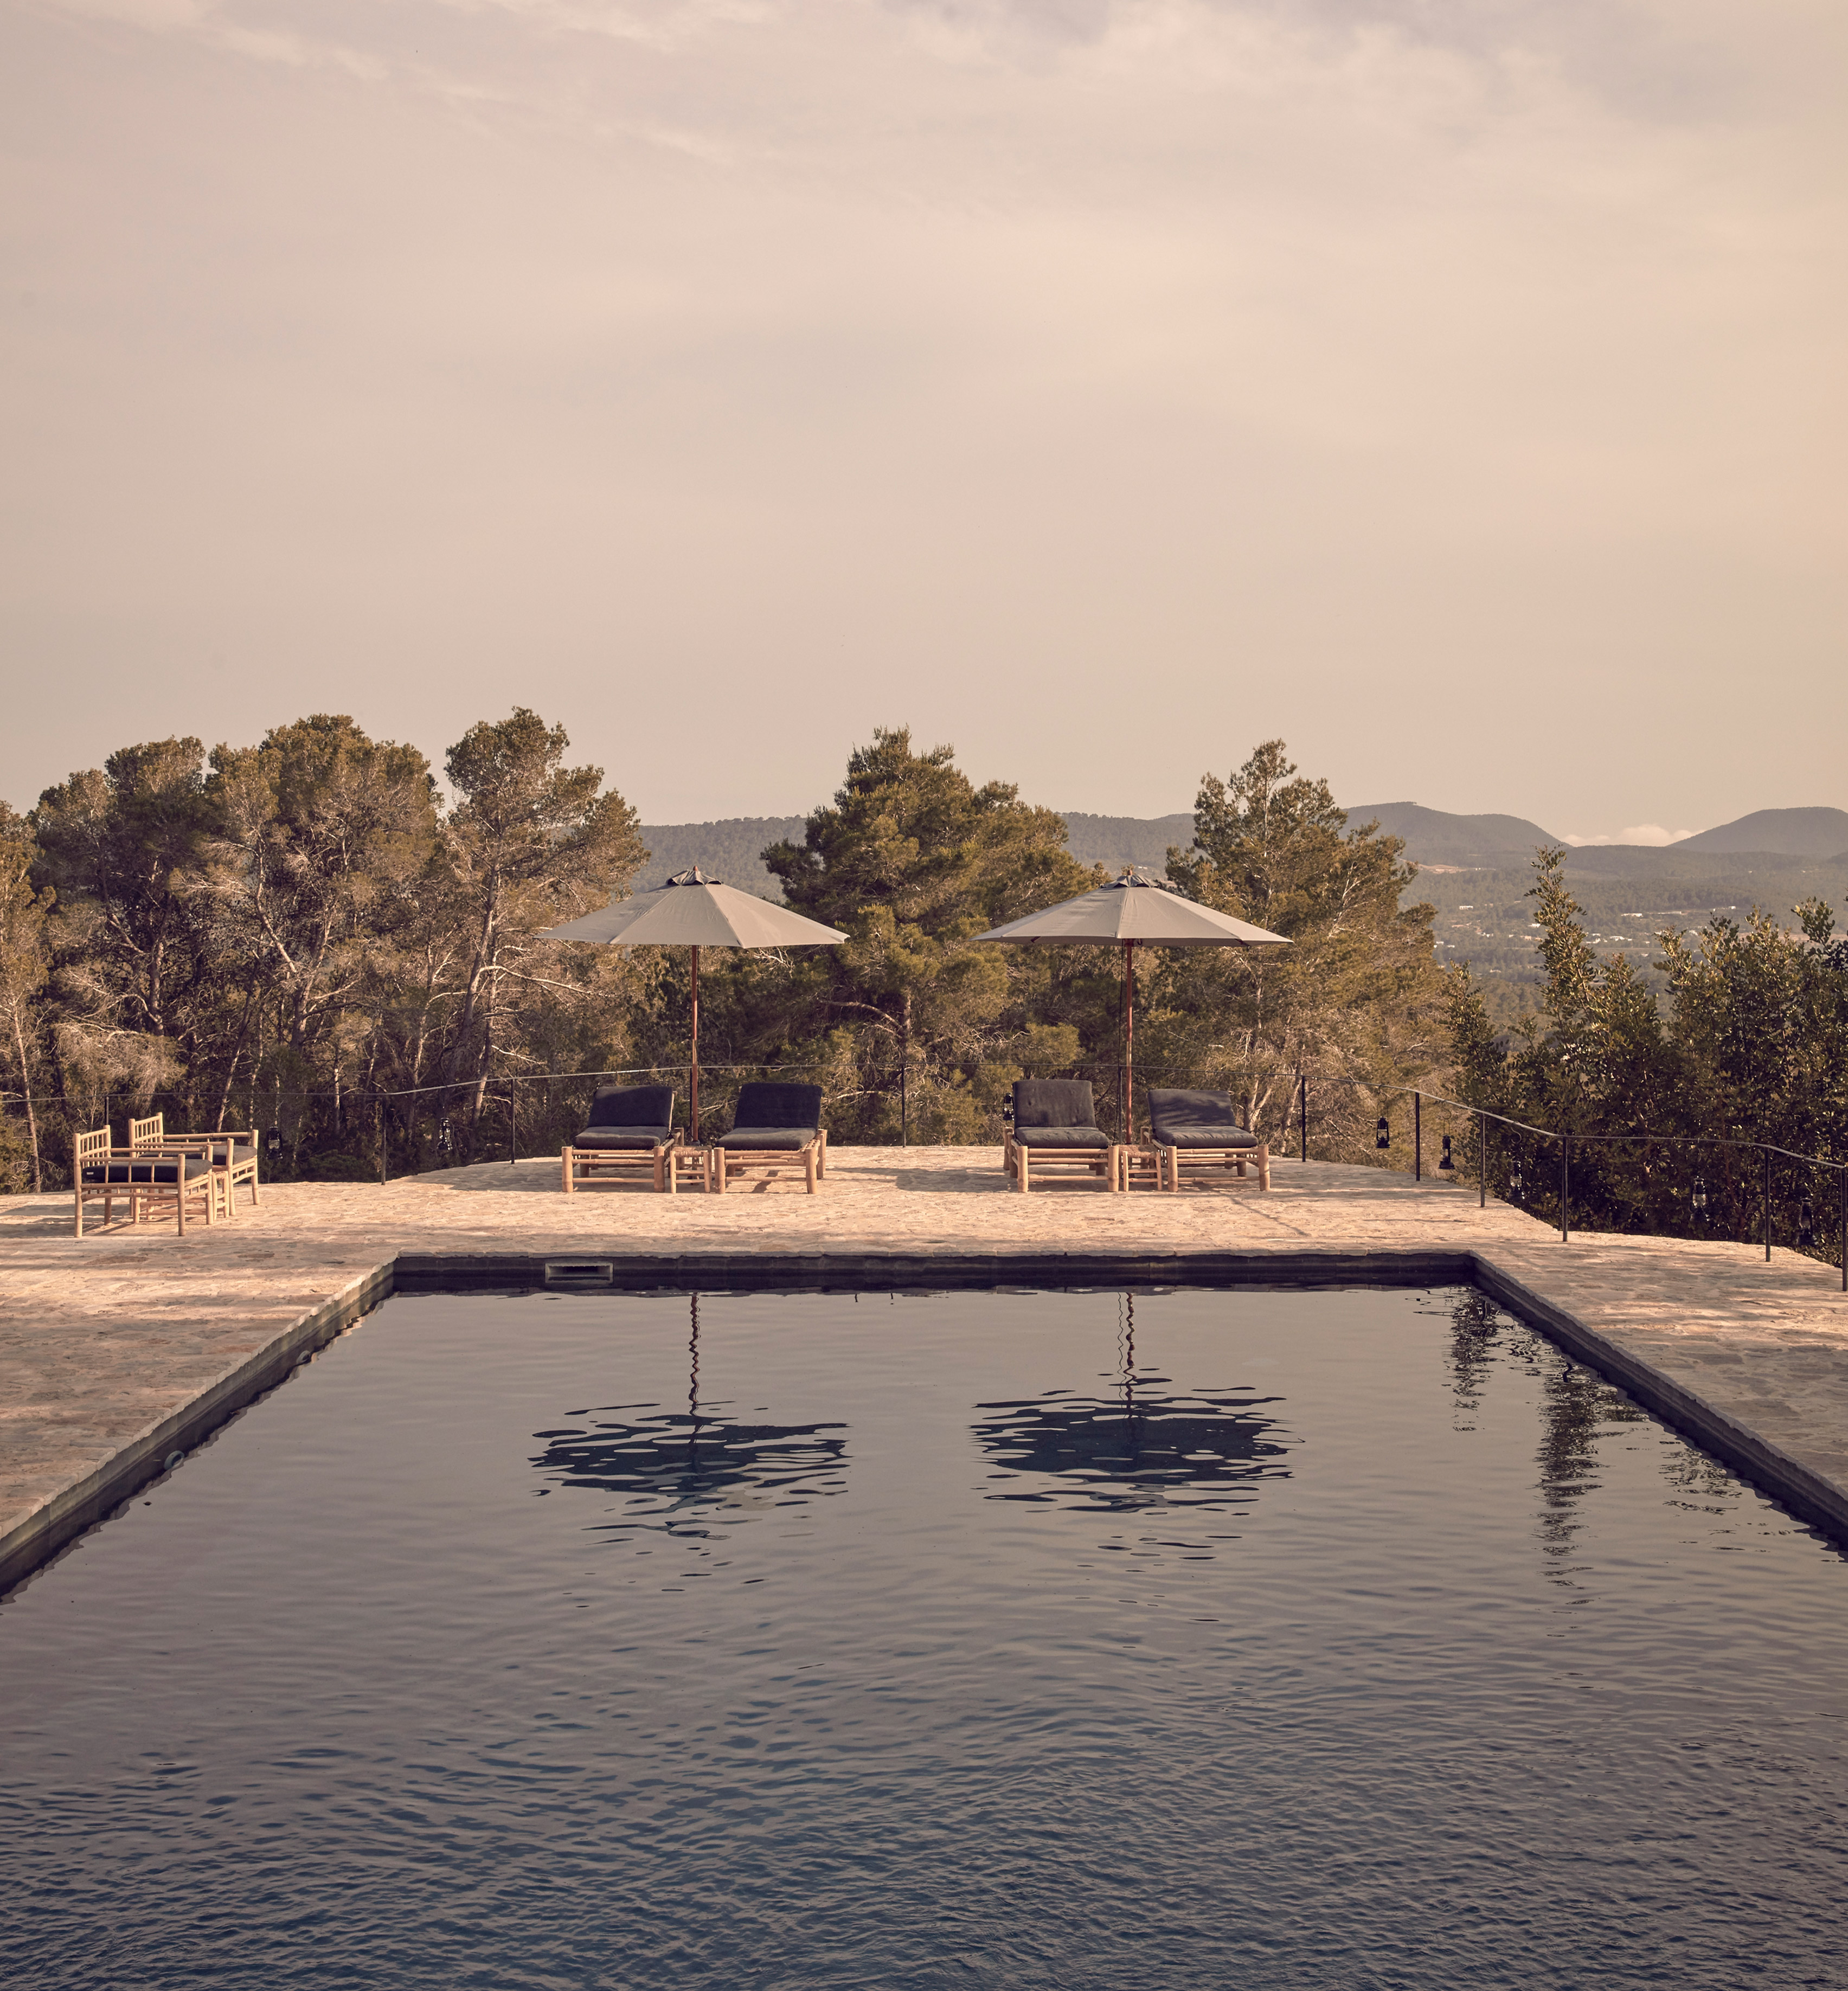 La Granja Ibiza is a members-only retreat with a rustic "back-to-basics" design